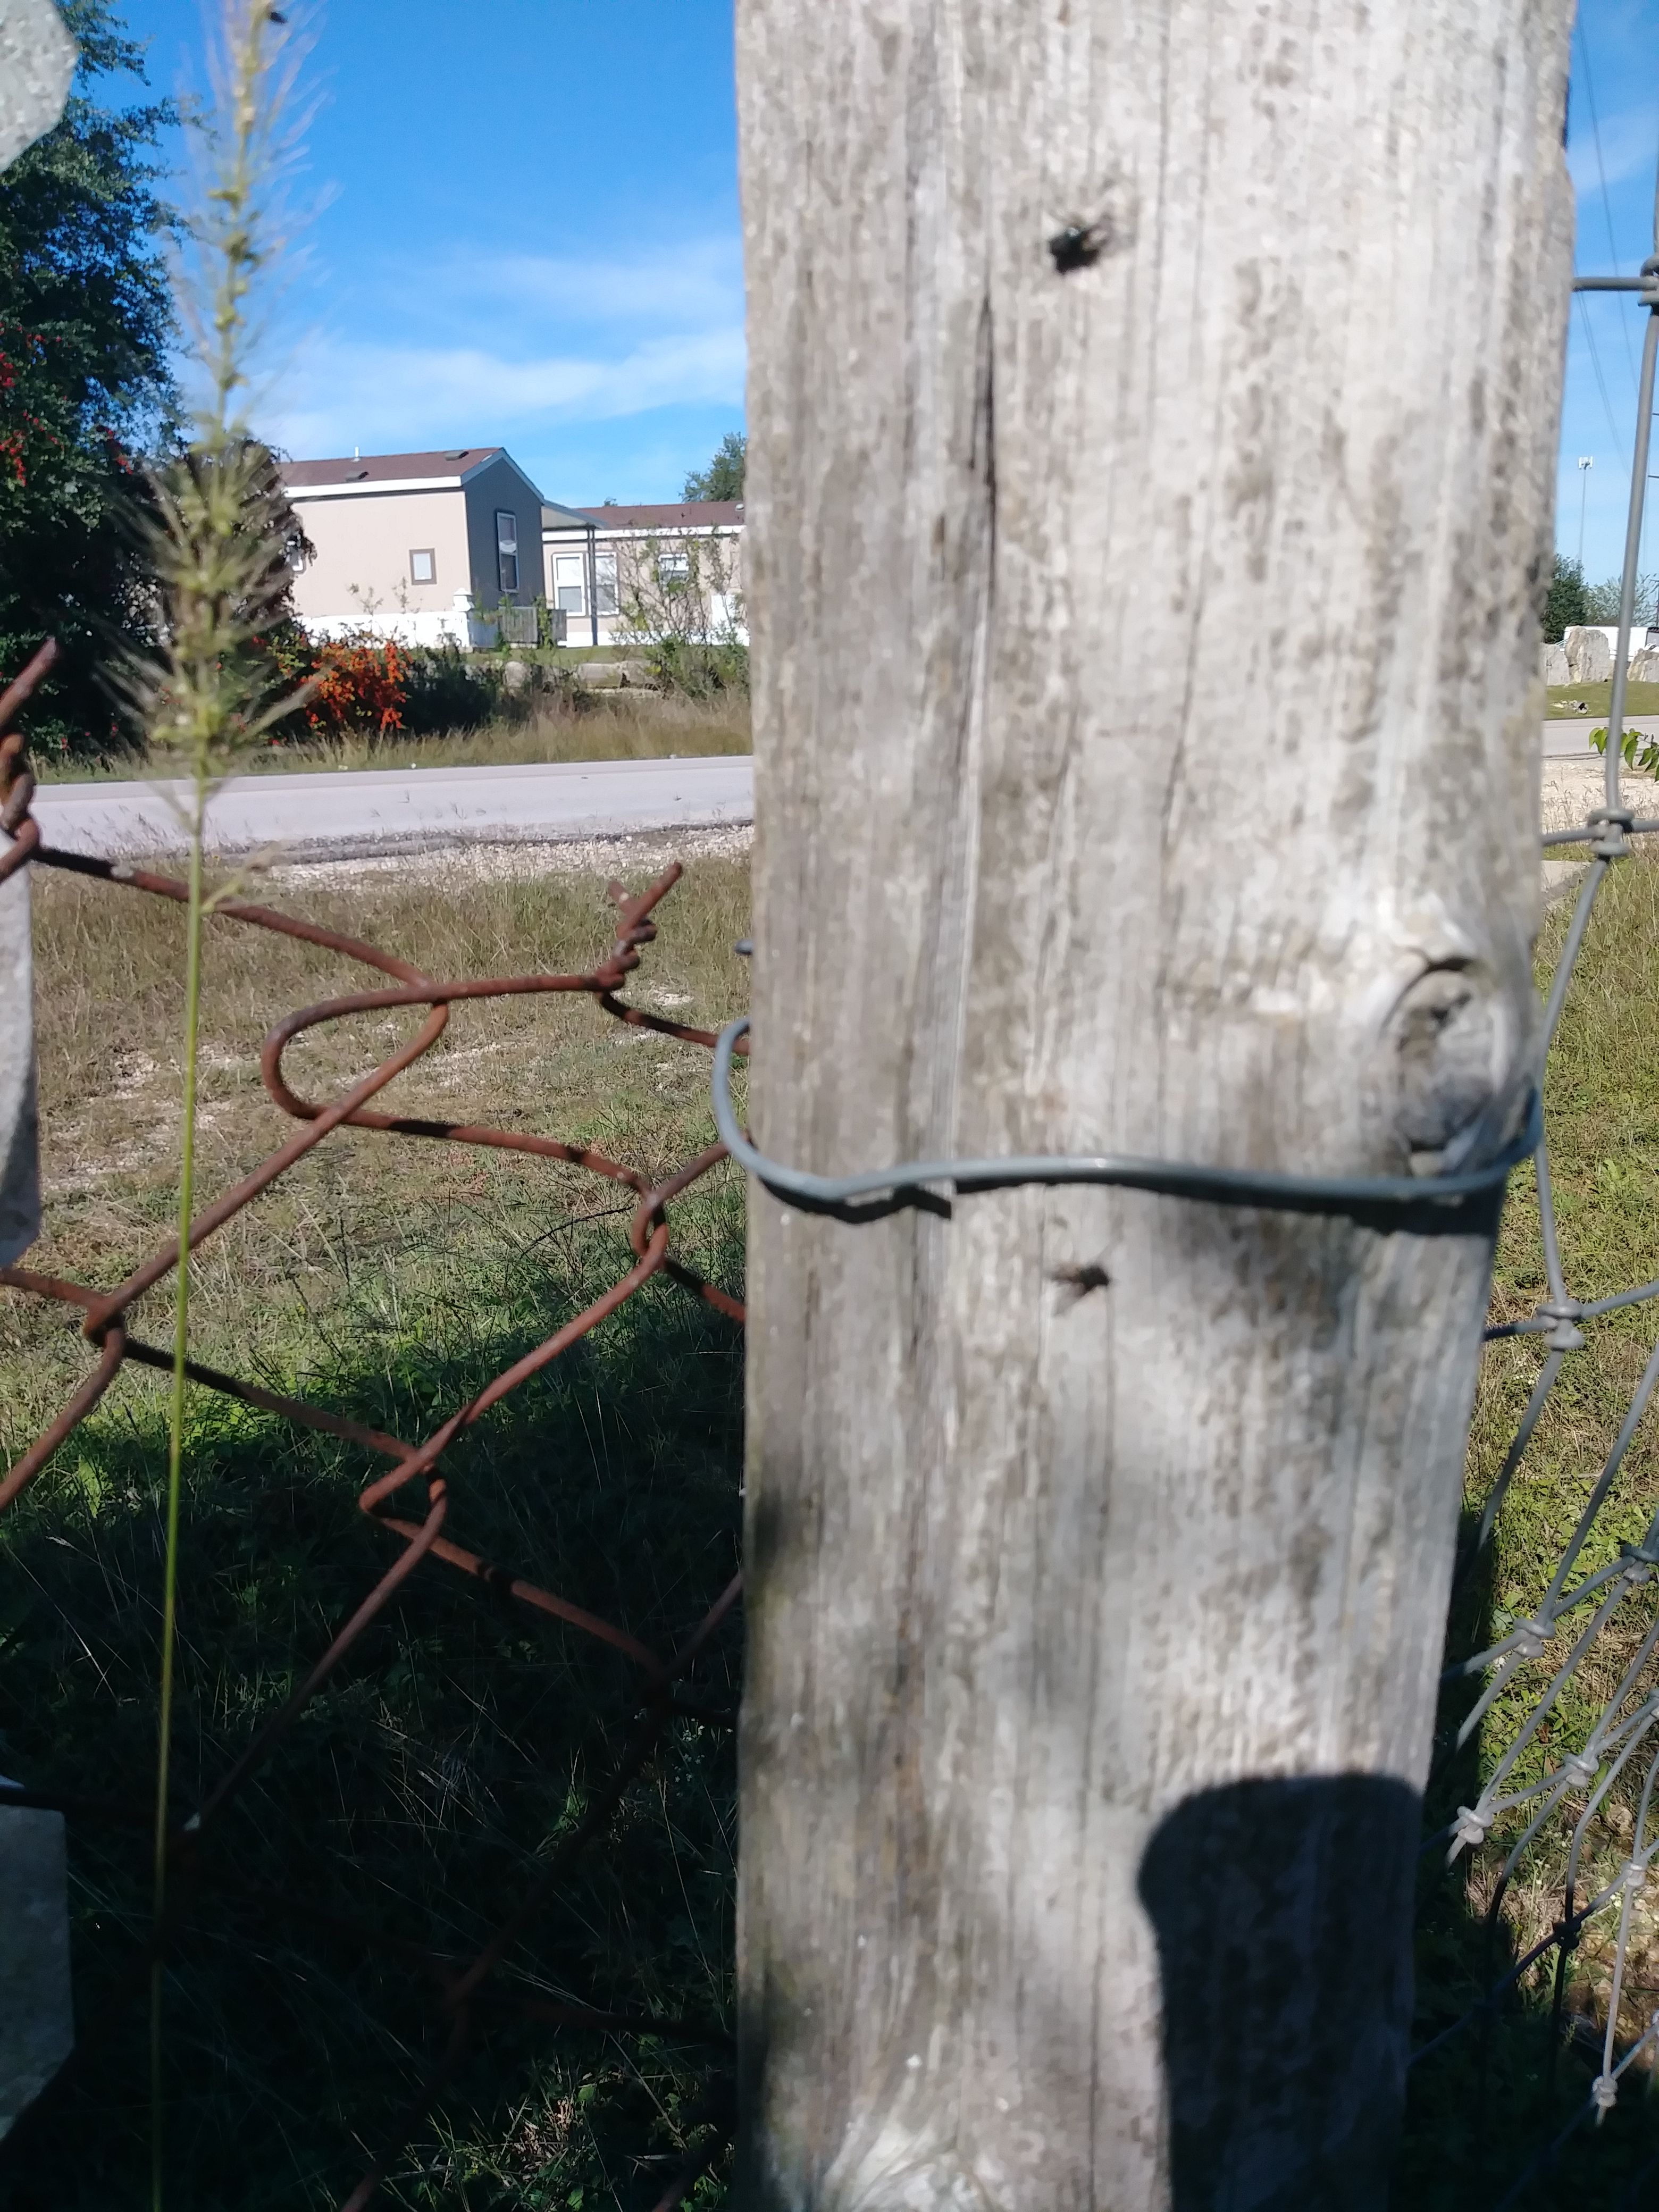 Repairs fence 4 pieces of wire - Charges THOUSANDS